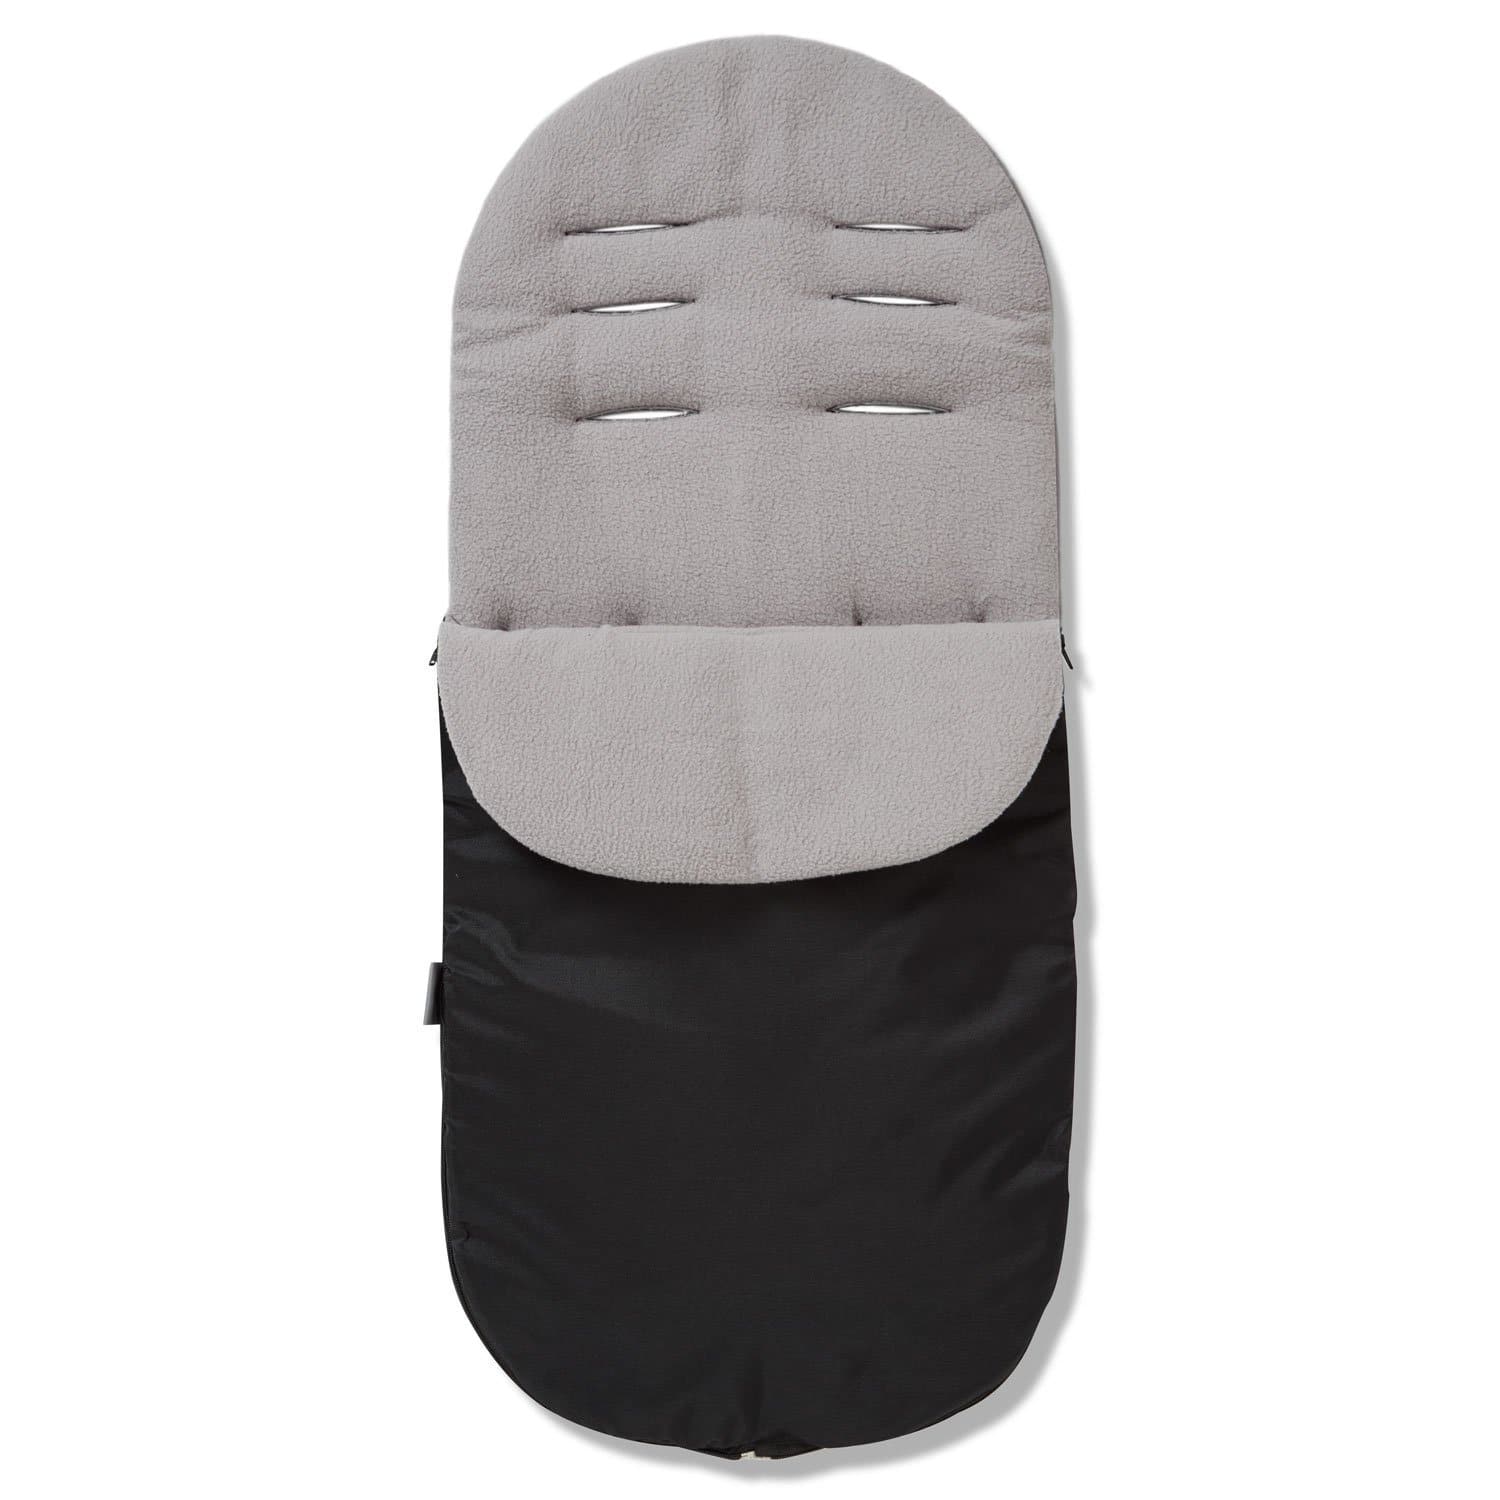 Footmuff / Cosy Toes Compatible with Peg Perego - Grey / Fits All Models | For Your Little One